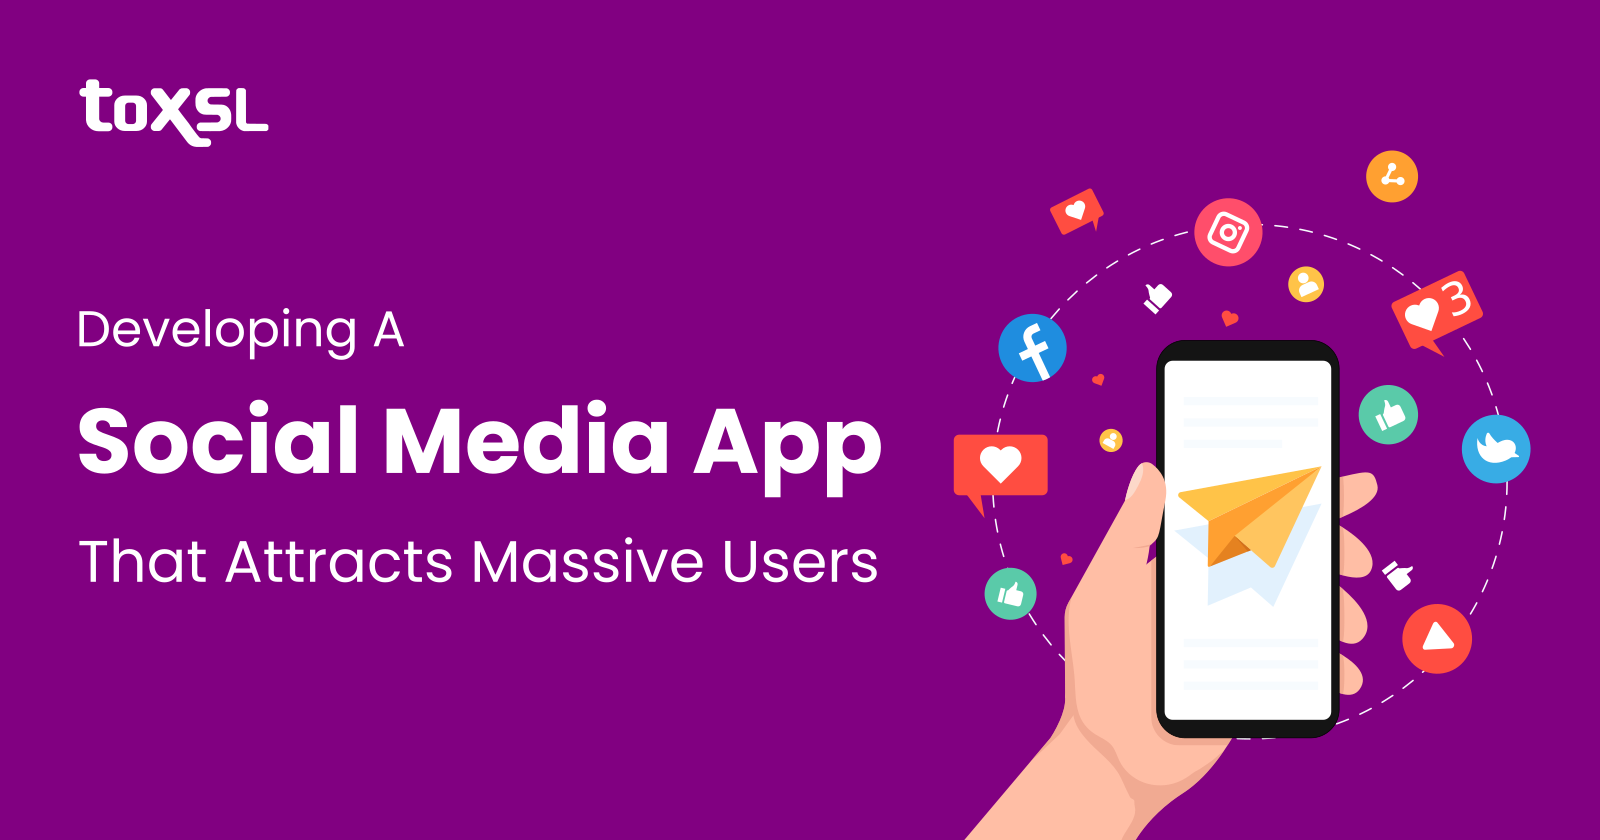 Complete Guide To Developing A Robust Social Media App With Massive User Attention